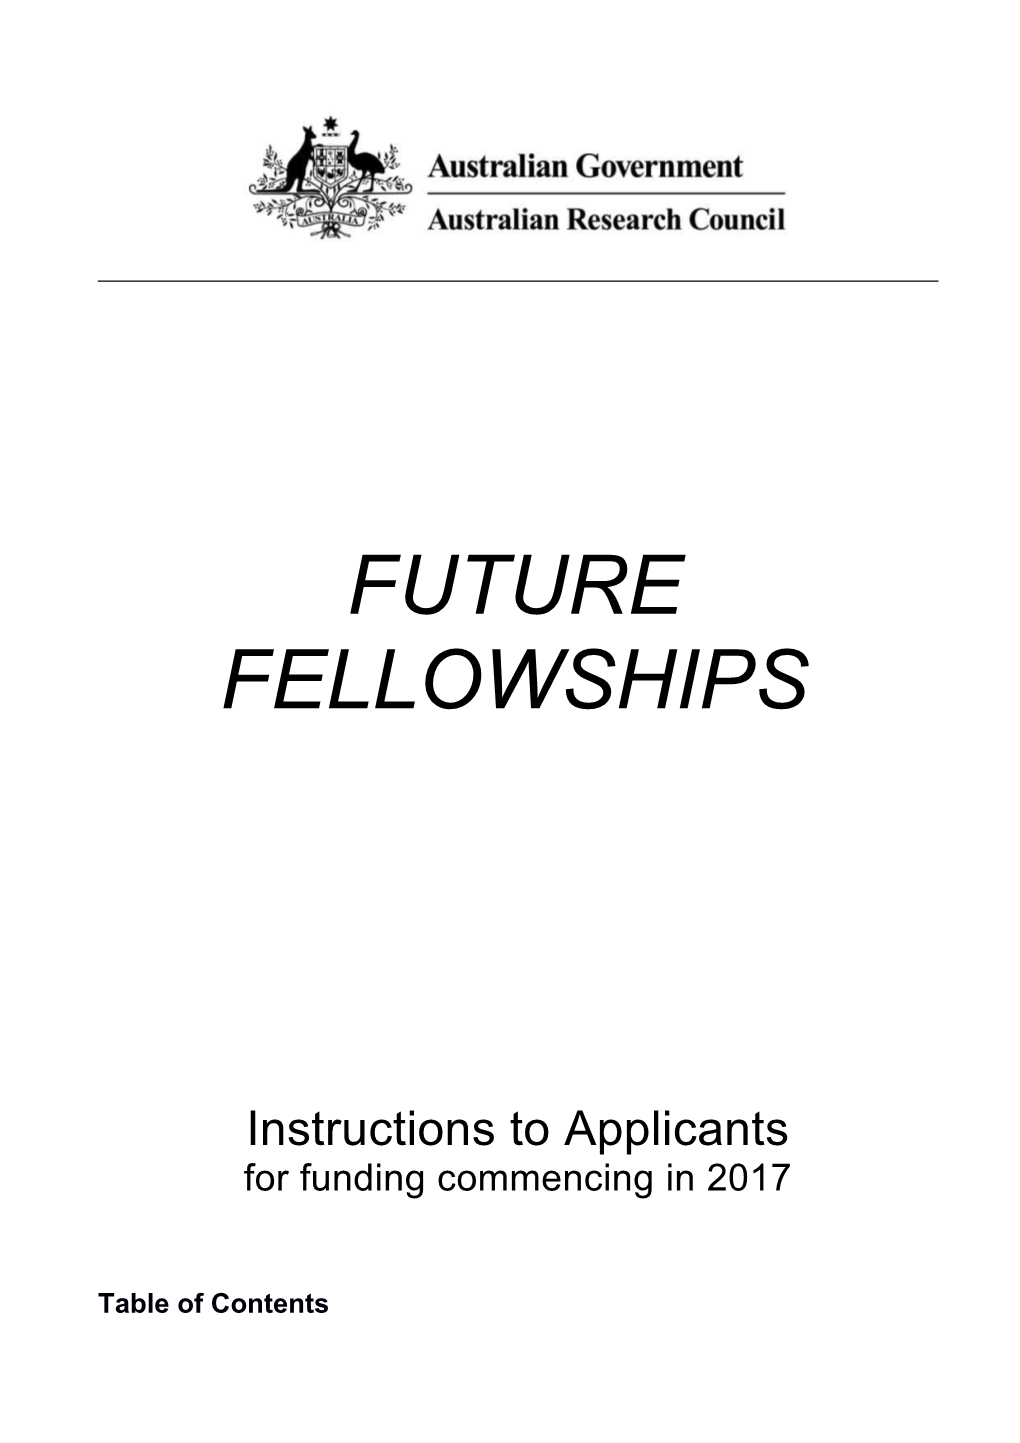 Future Fellowships for Funding Commencing in 2017 Instructions to Applicants